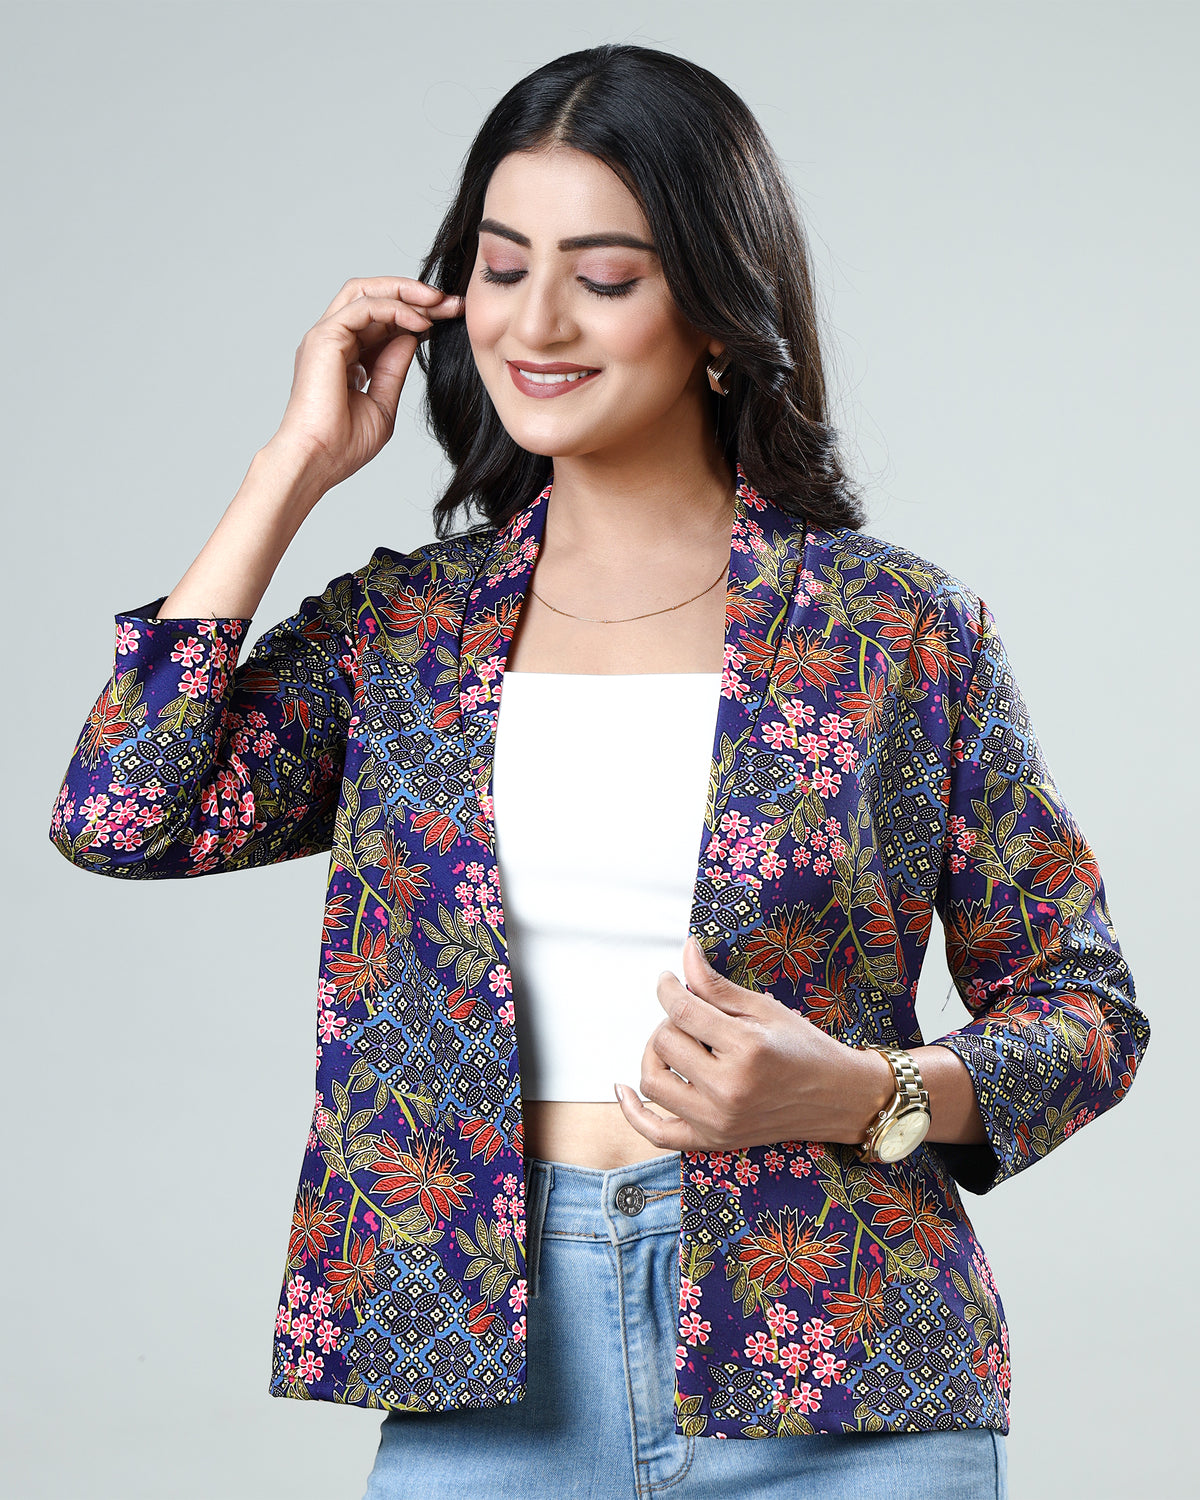 Everyone's Loving It: The Floral Womens Jacket